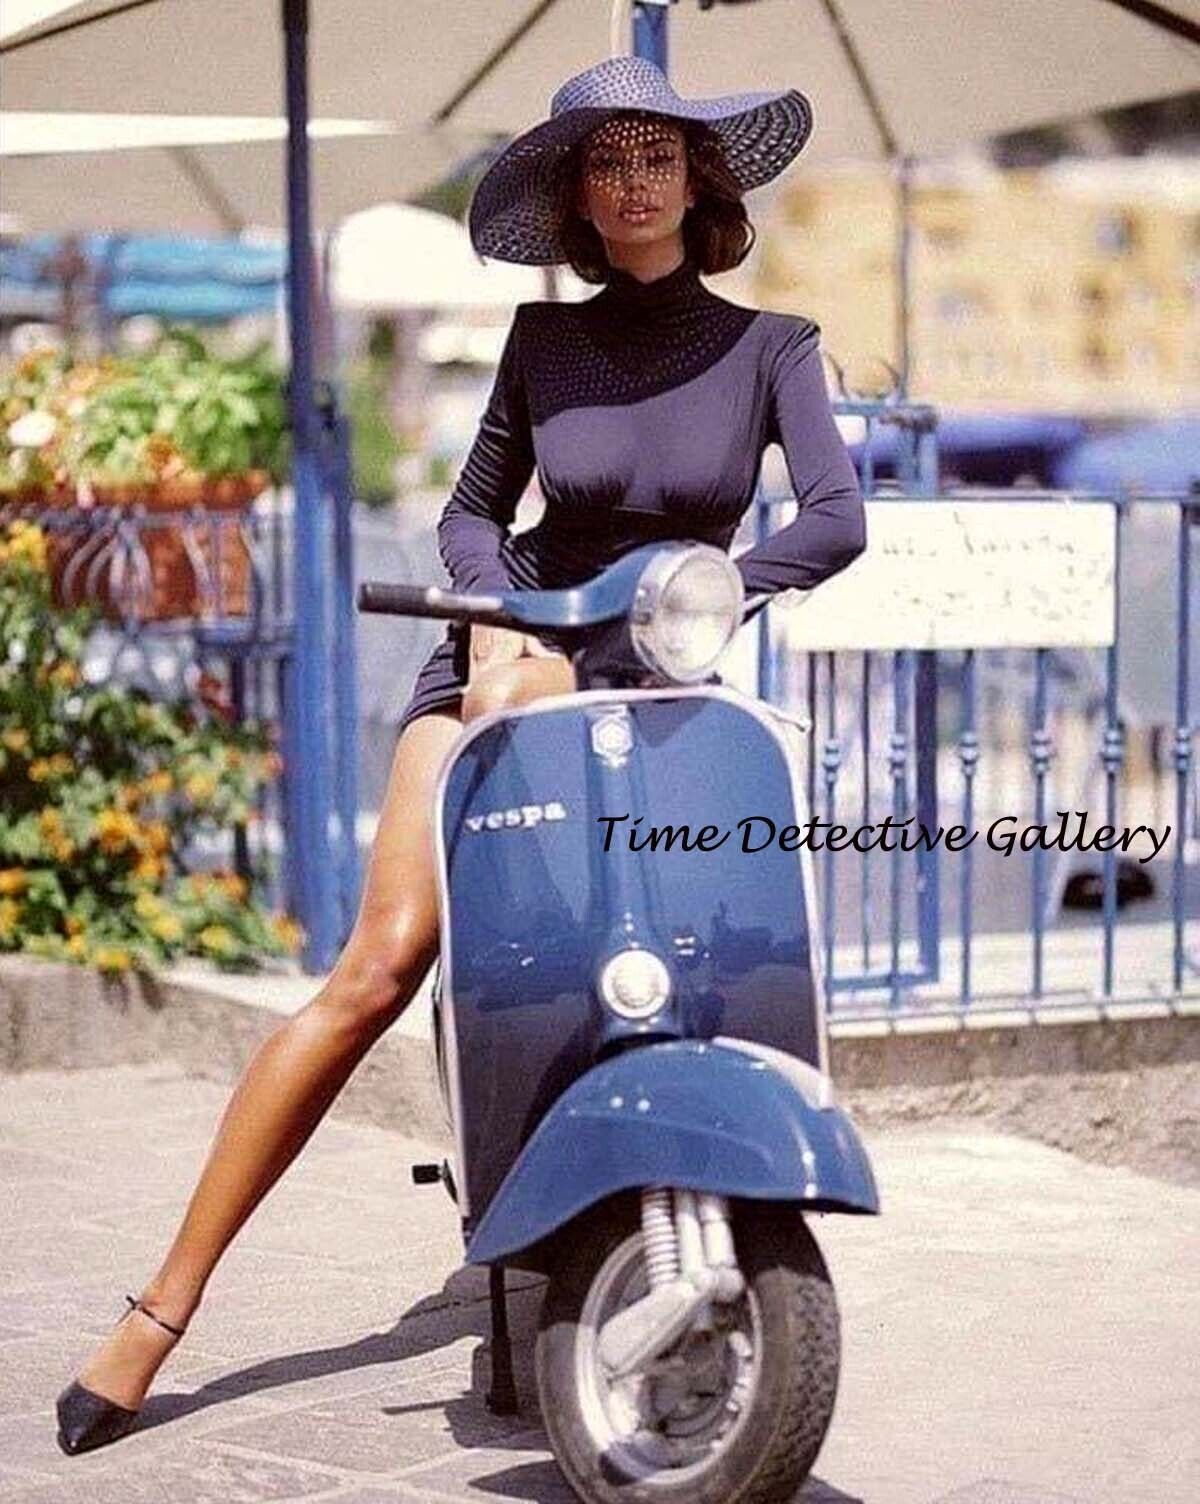 Romanian Model and Actress Madalina Ghe Sitting on a Vespa - Vintage Photo Print